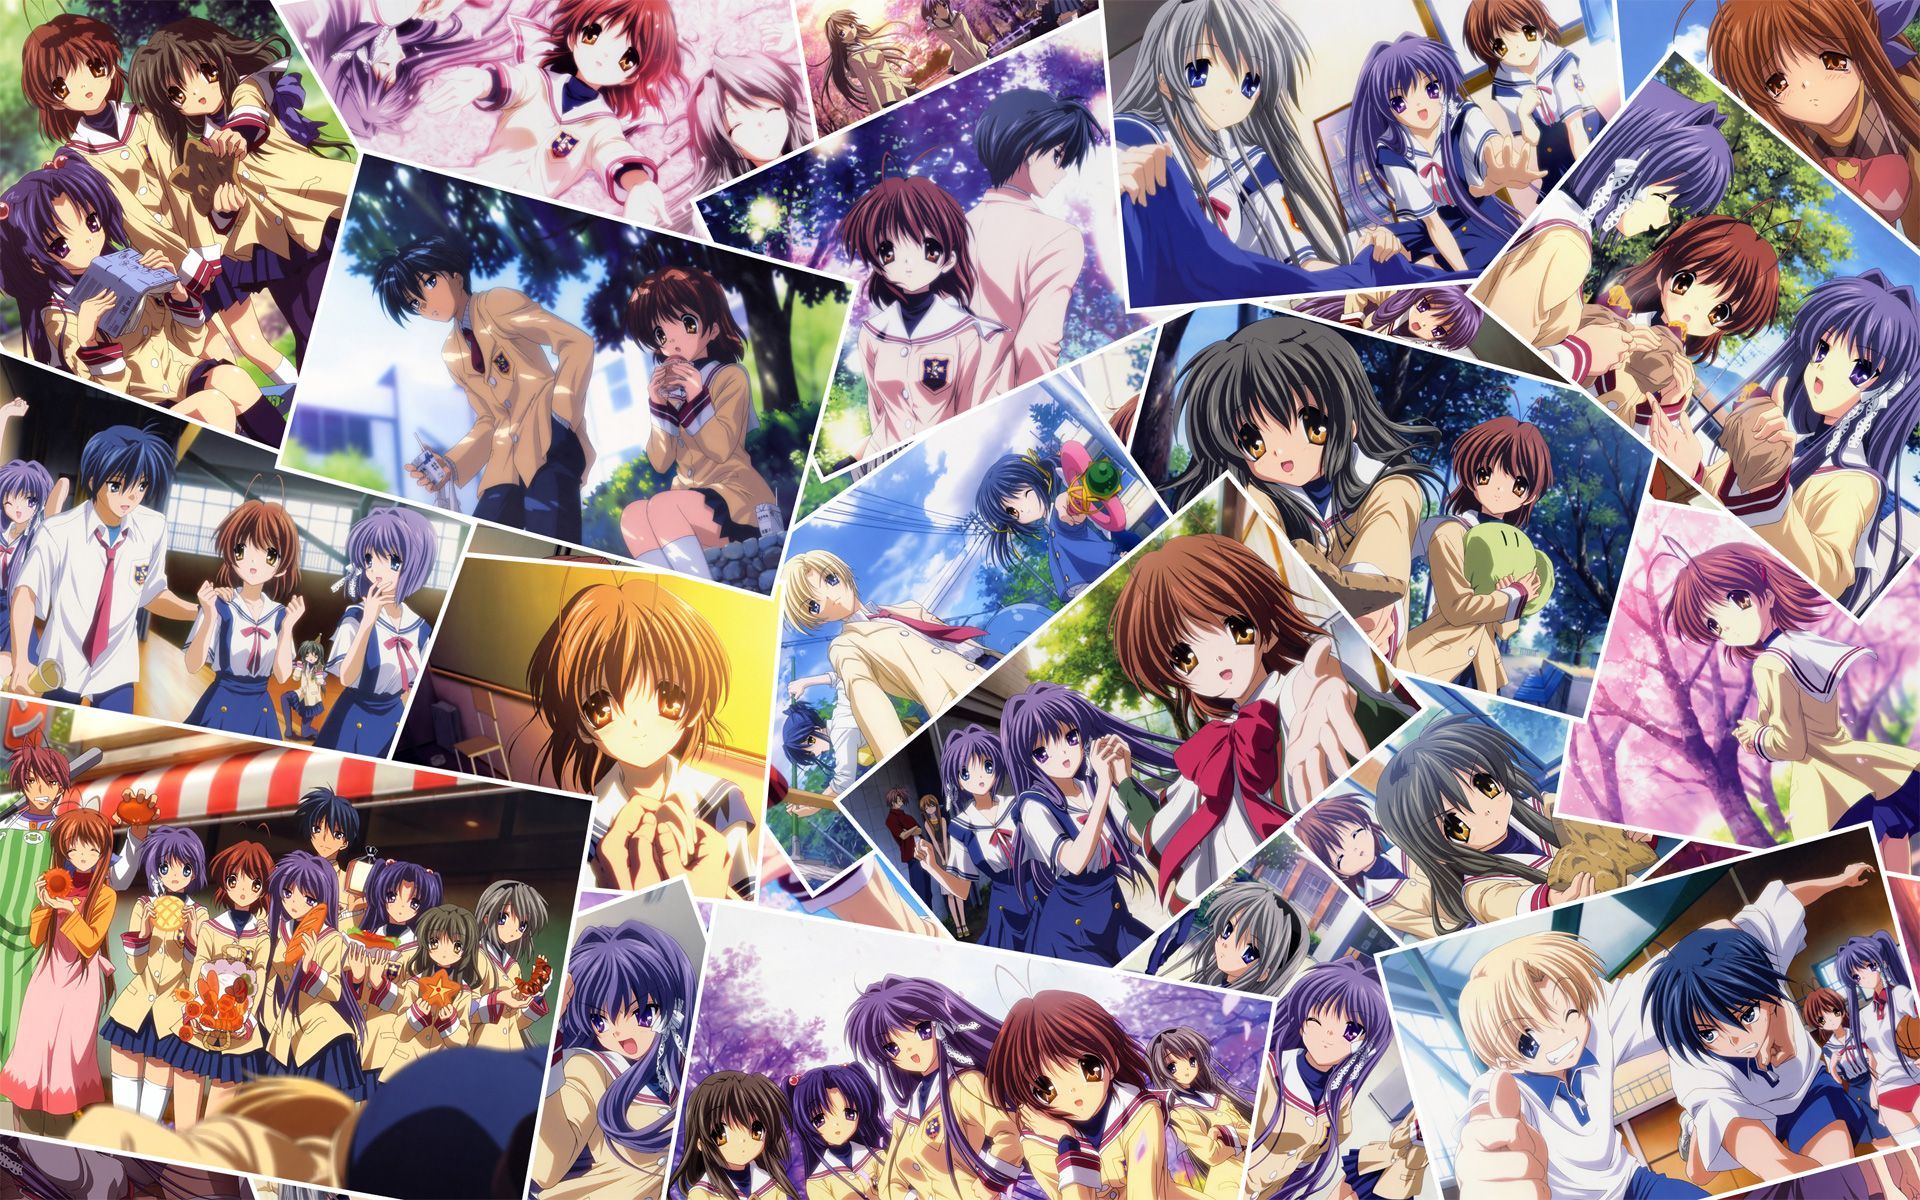 Anime Collage Wallpaper Free .wallpaperaccess.com